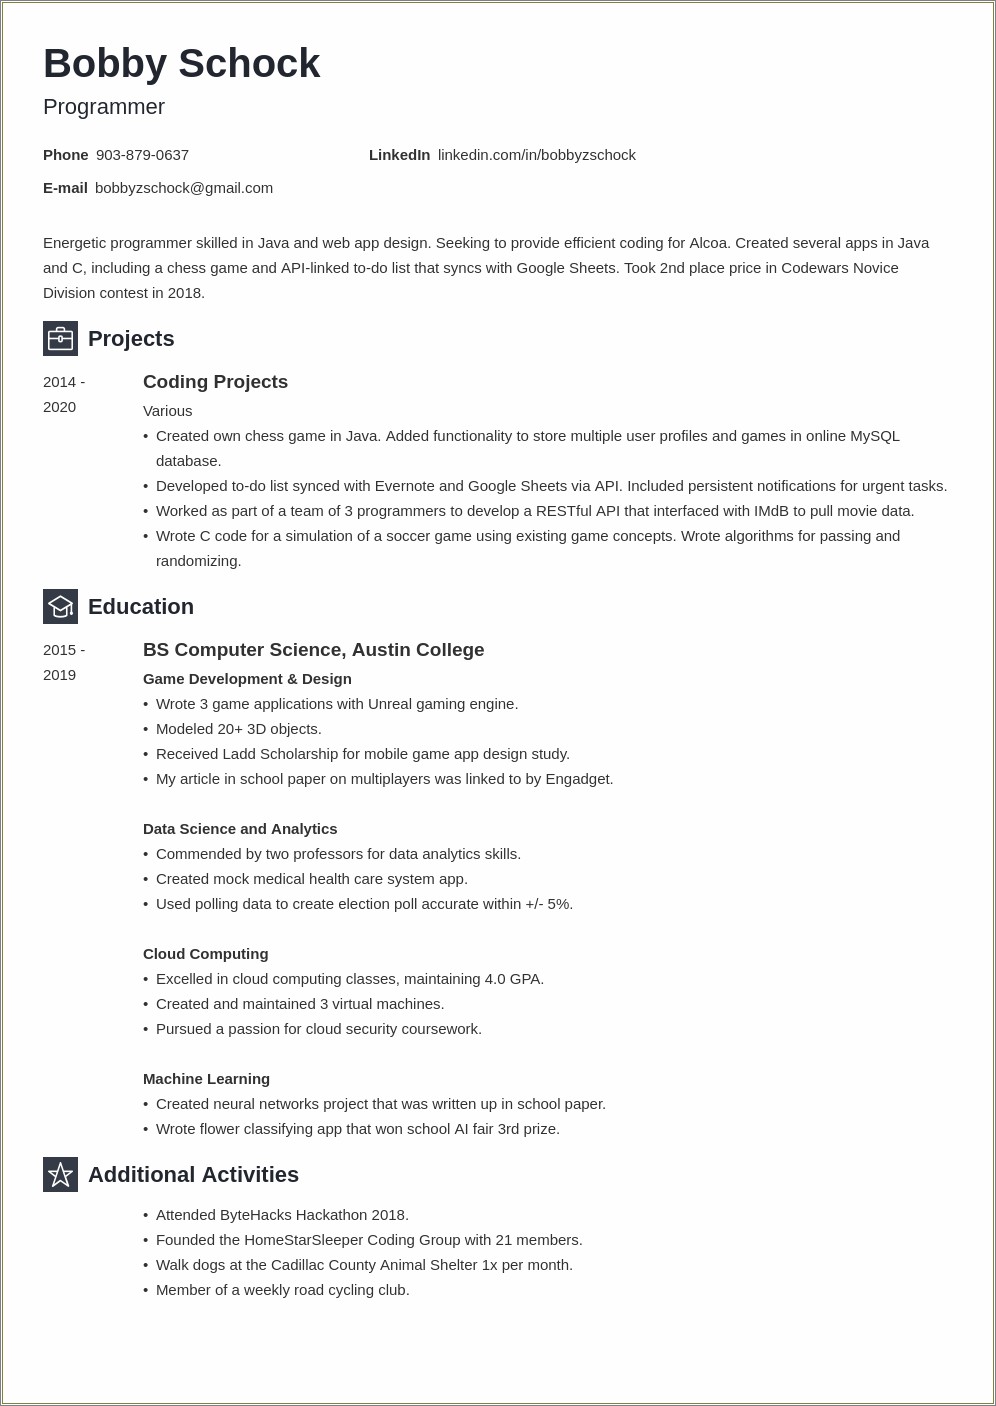 Resume Skills For A Job With No Experience